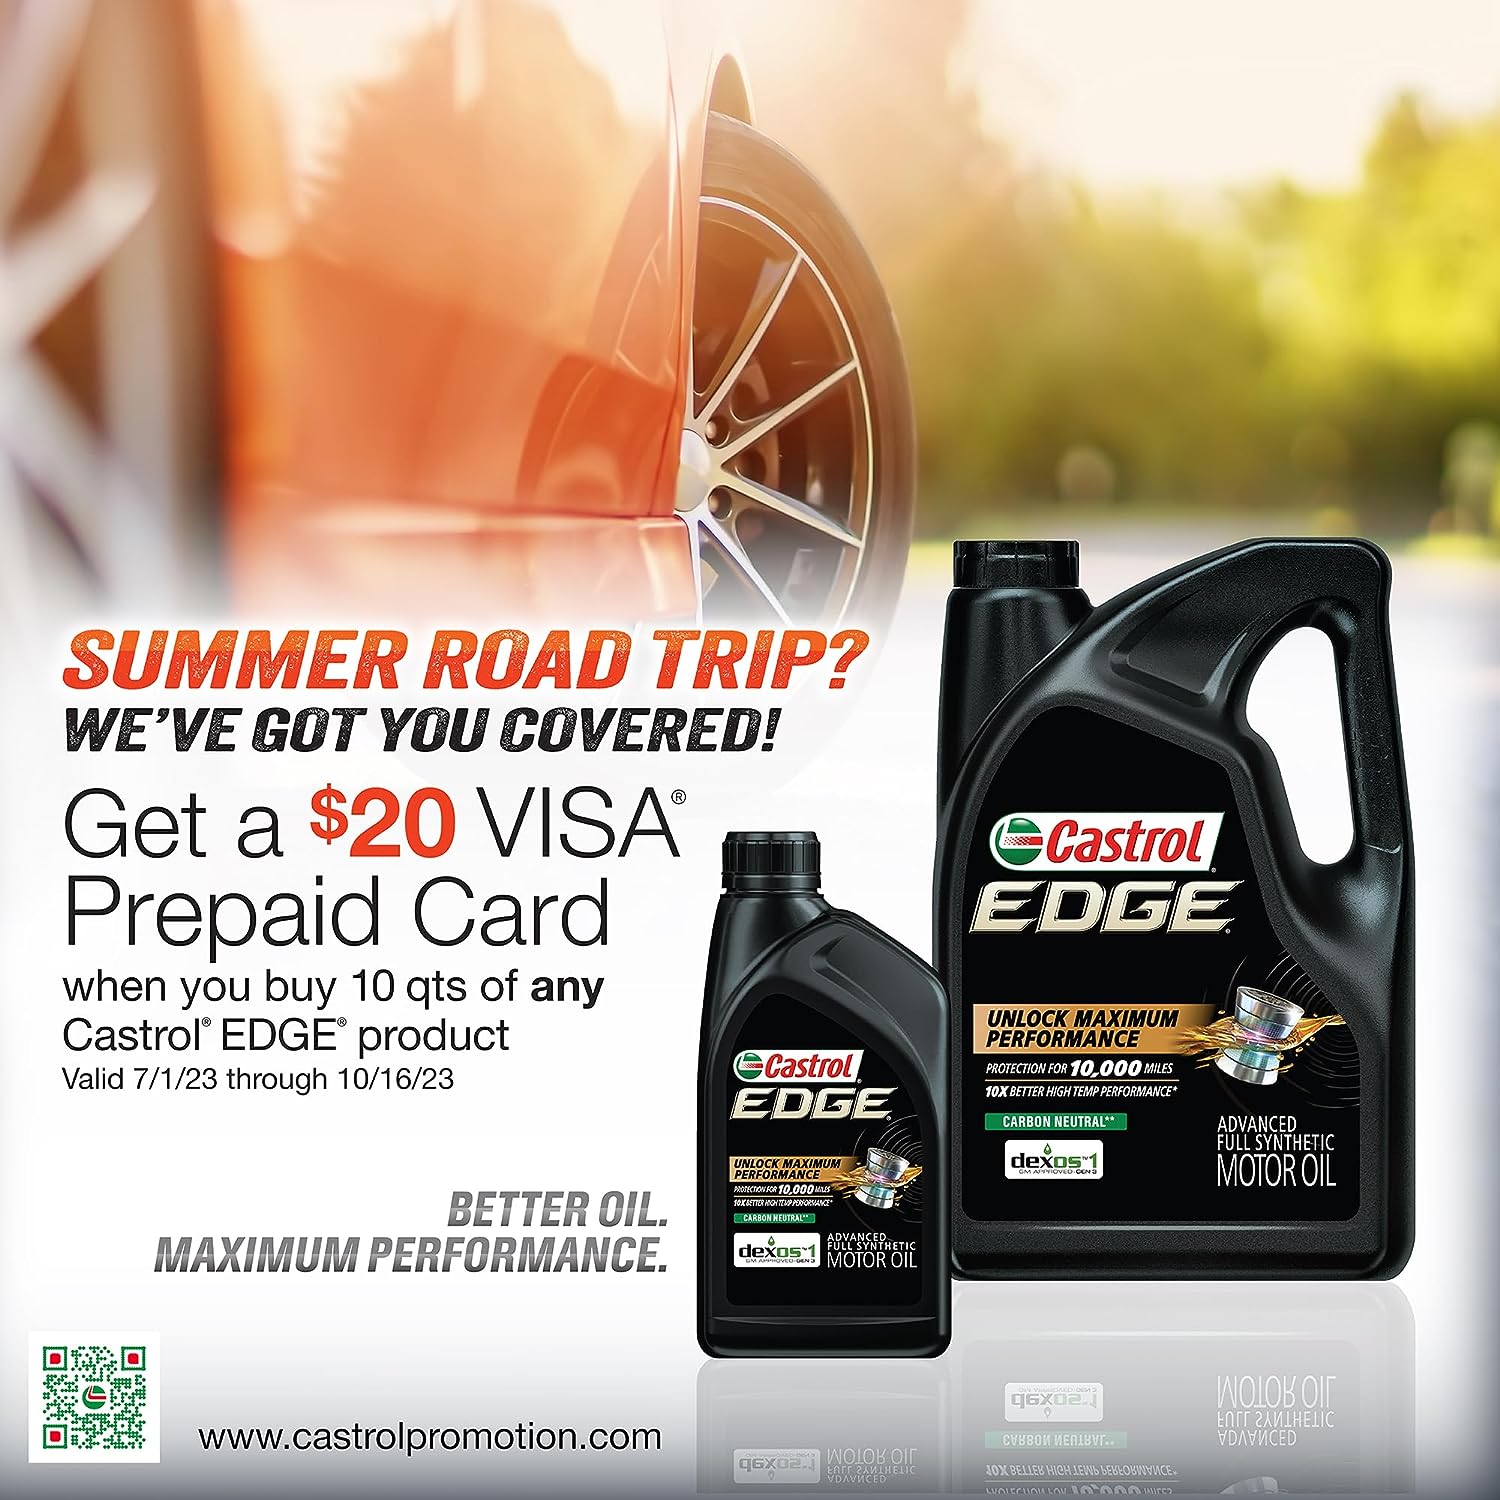  Castrol EDGE Euro 5W-40 A3/B4 Advanced Full Synthetic Motor  Oil, 1 Quart, Pack of 6 : Automotive